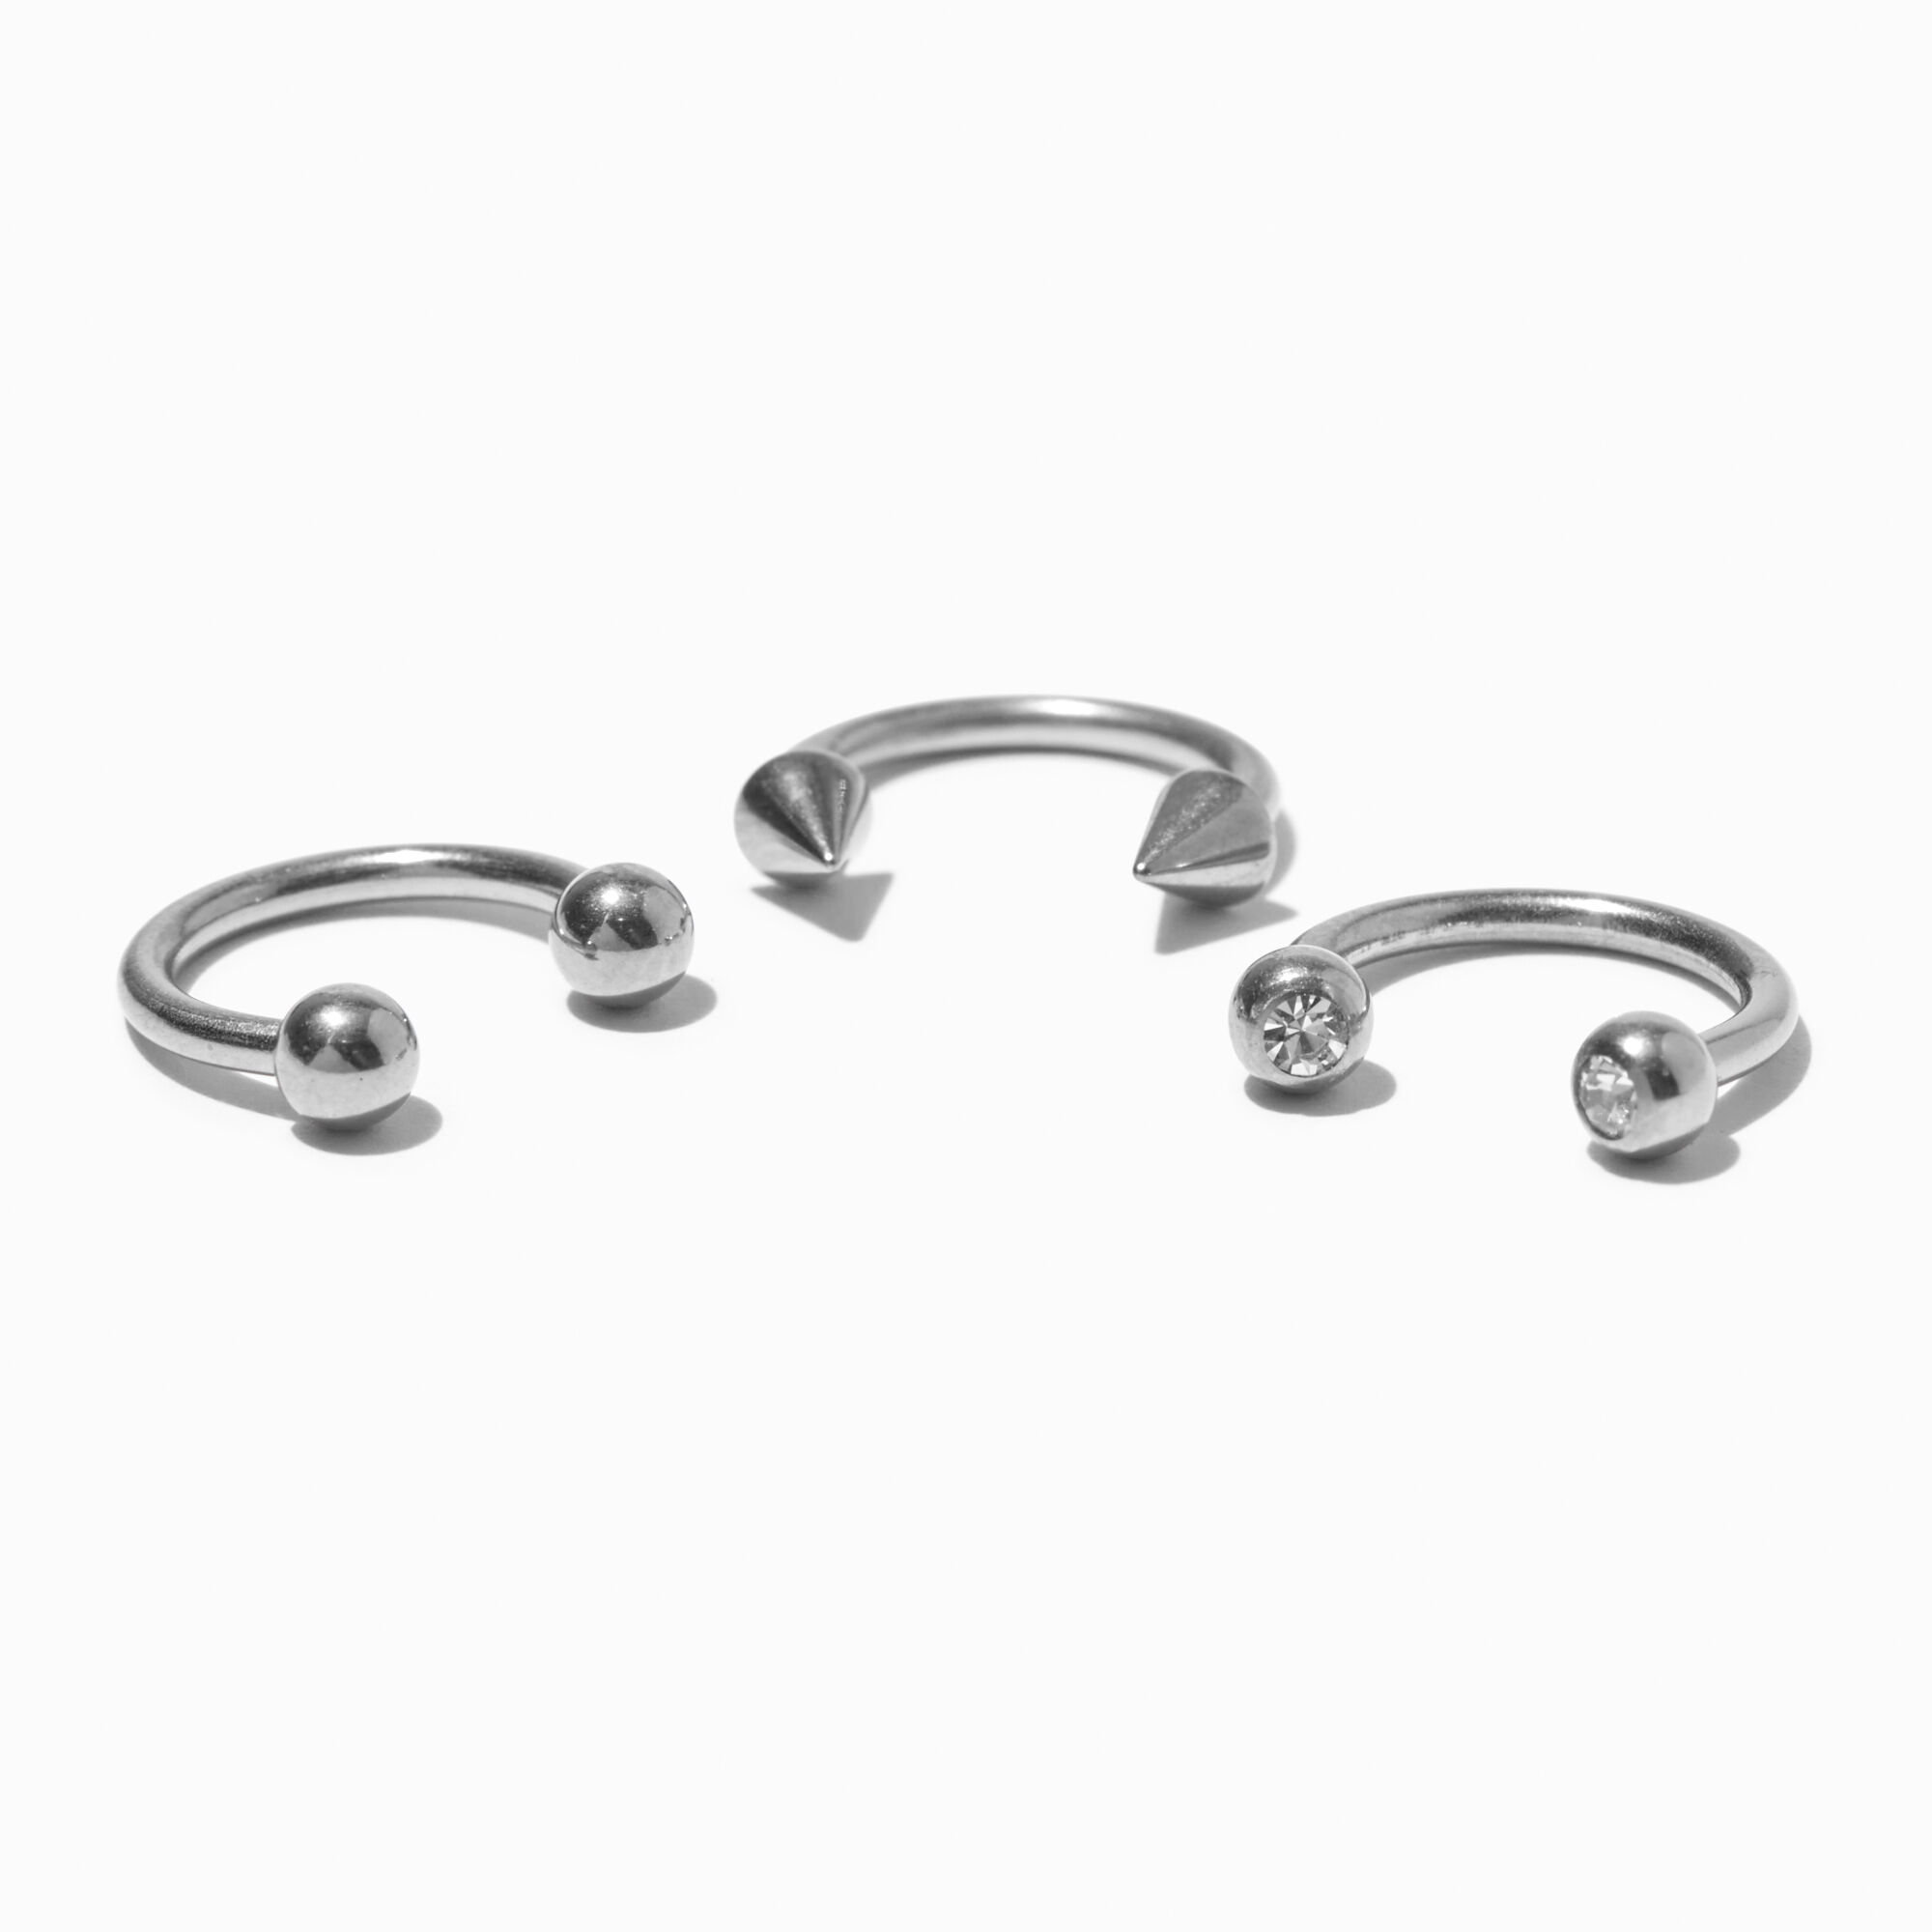 View Claires Tone Titanium Helix 16G Horseshoe Earrings 3 Pack Silver information